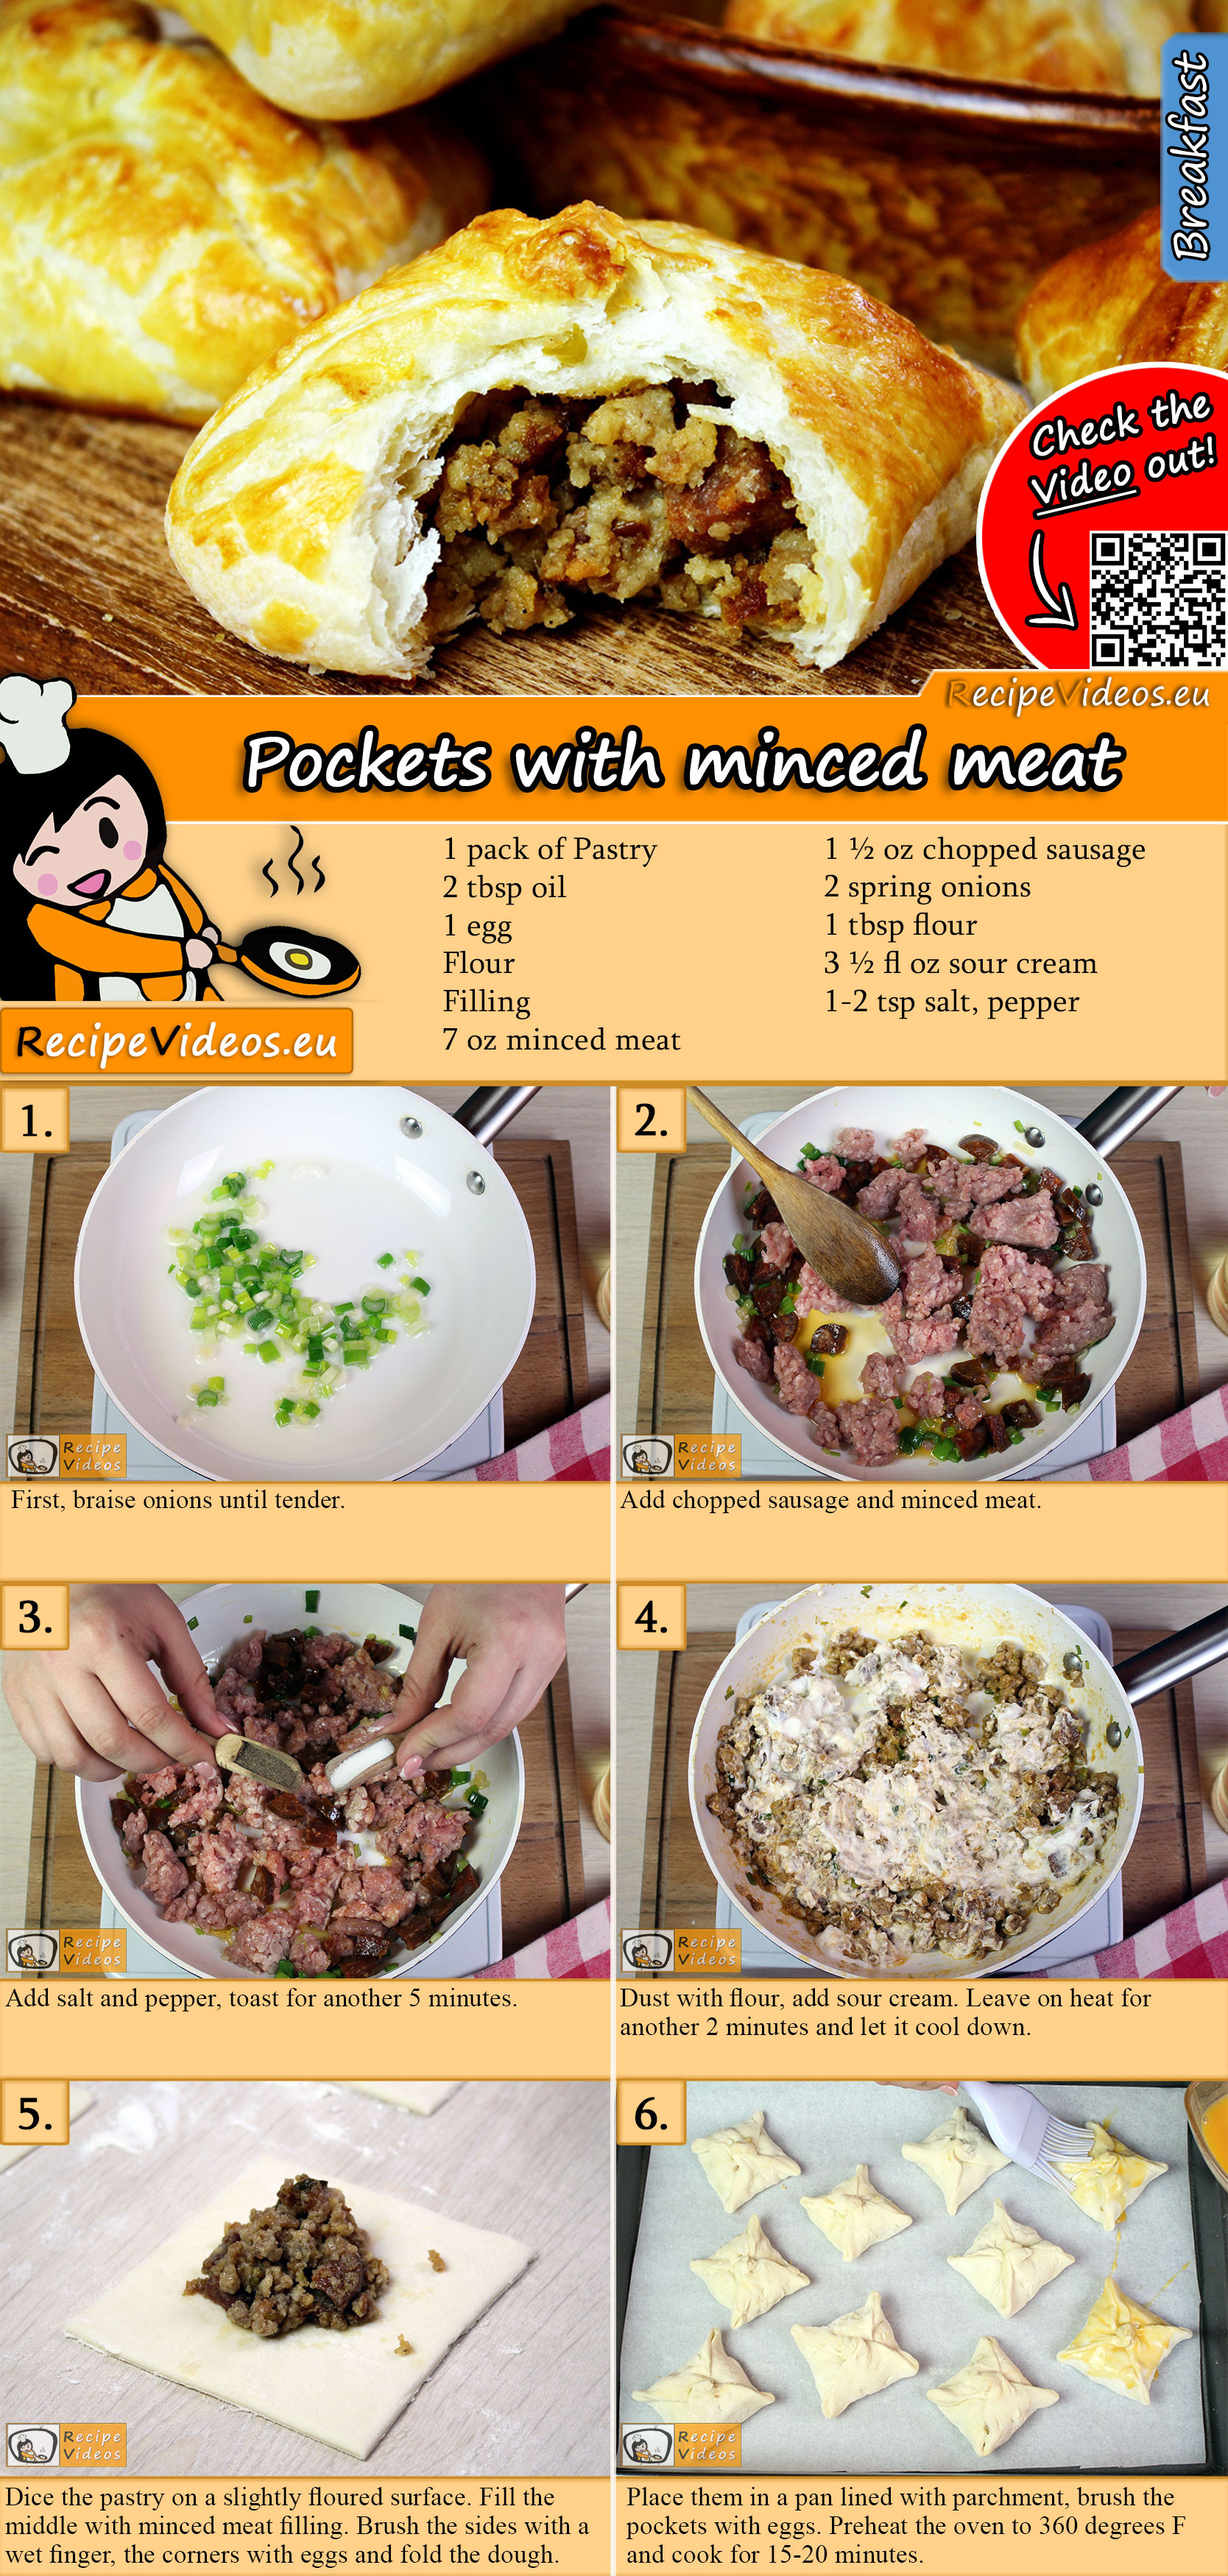 Pockets with minced meat recipe with video